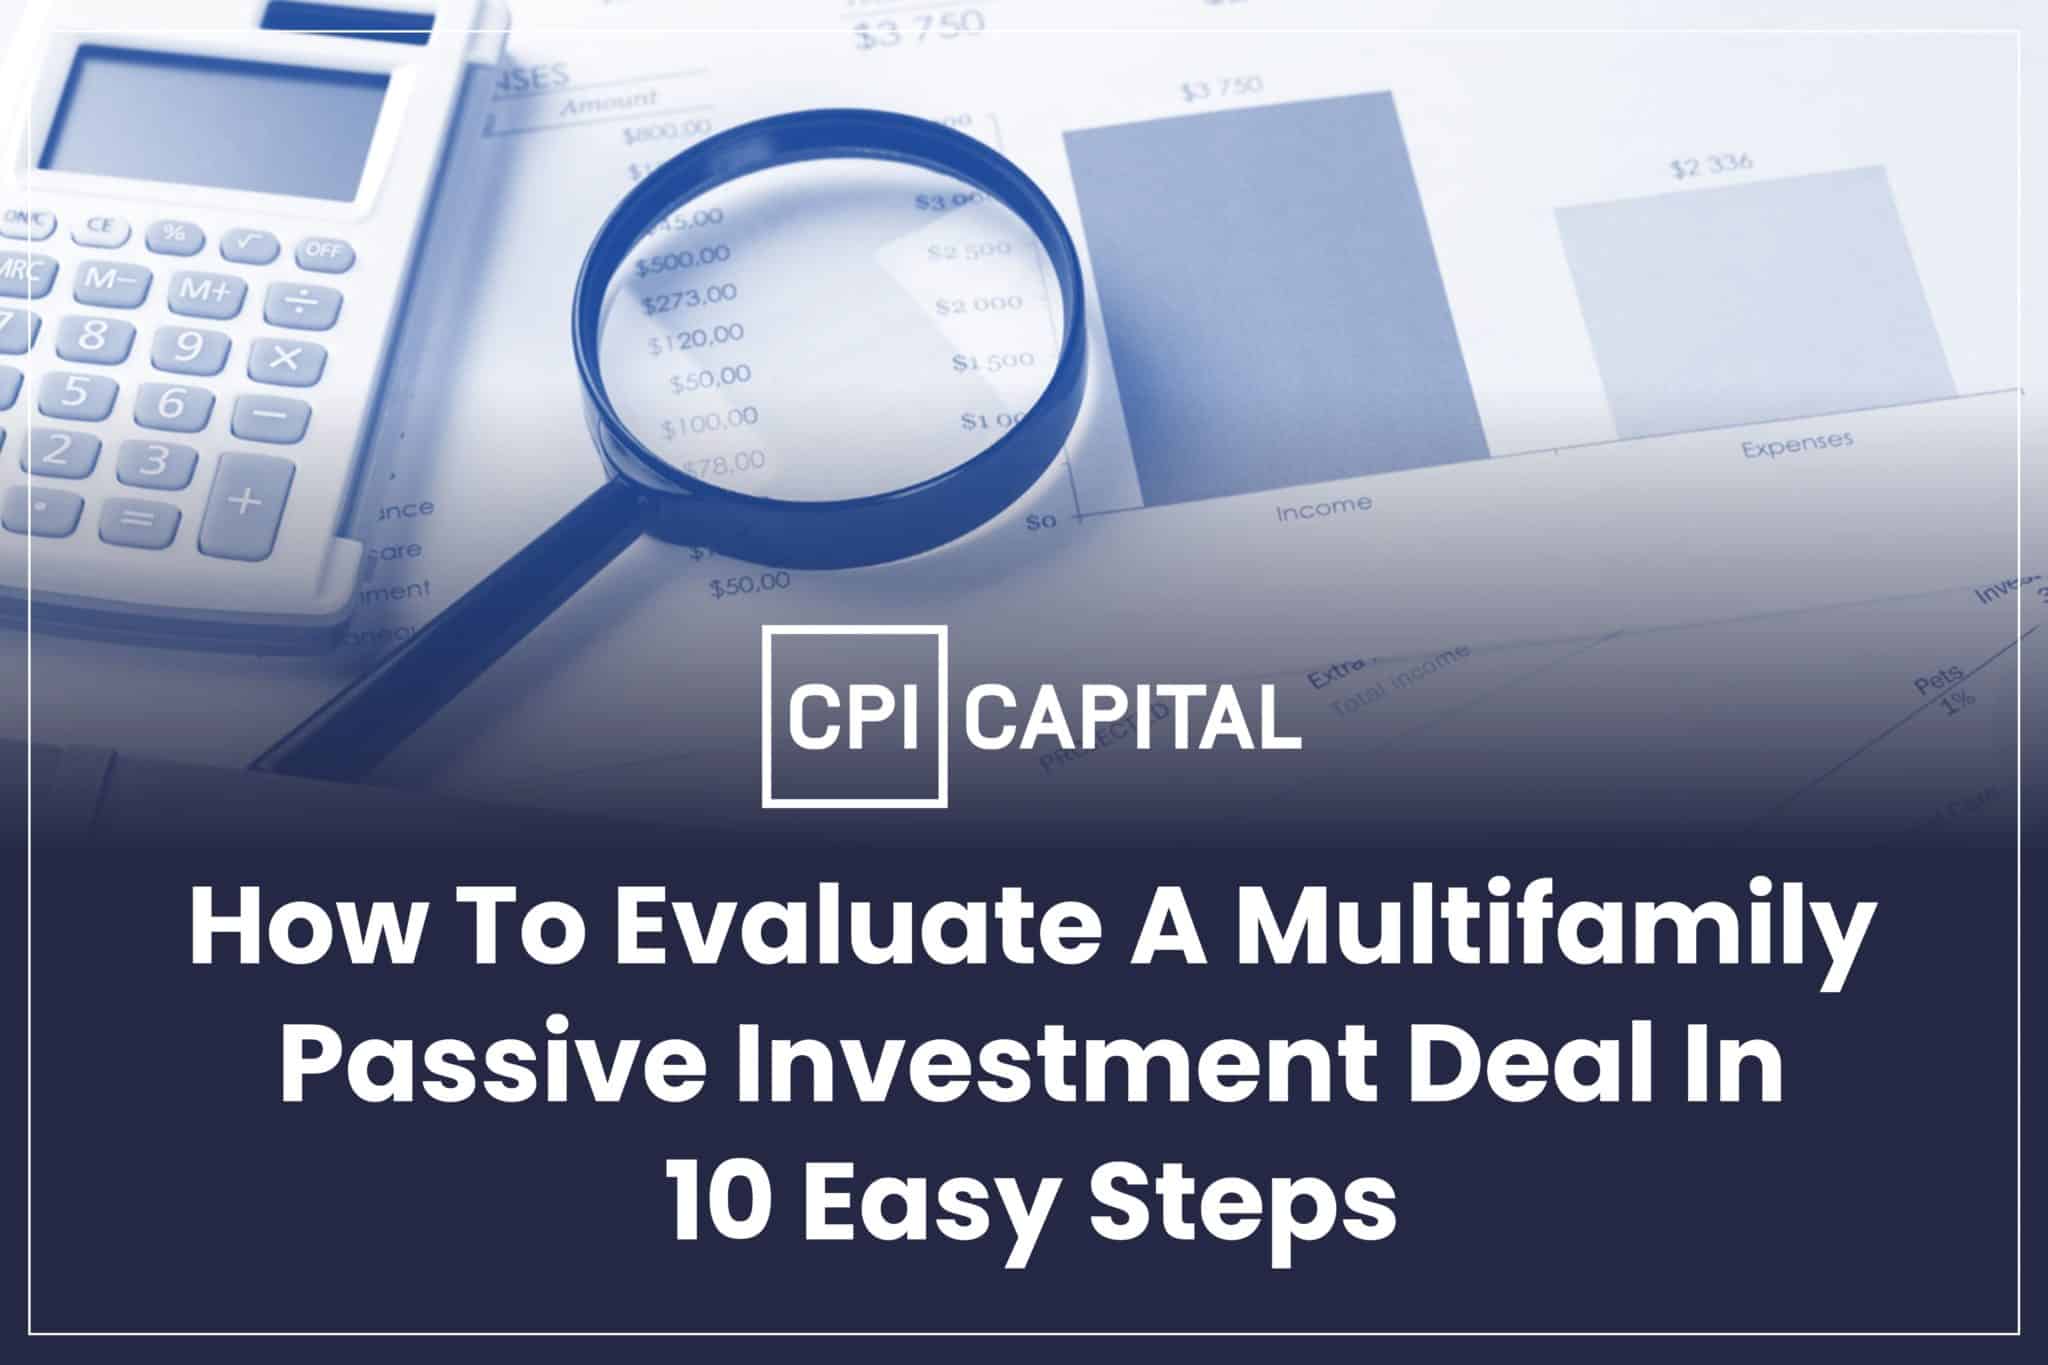 CPI capital_How To Evaluate A Multifamily Passive Investment Deal In 10 easy steps